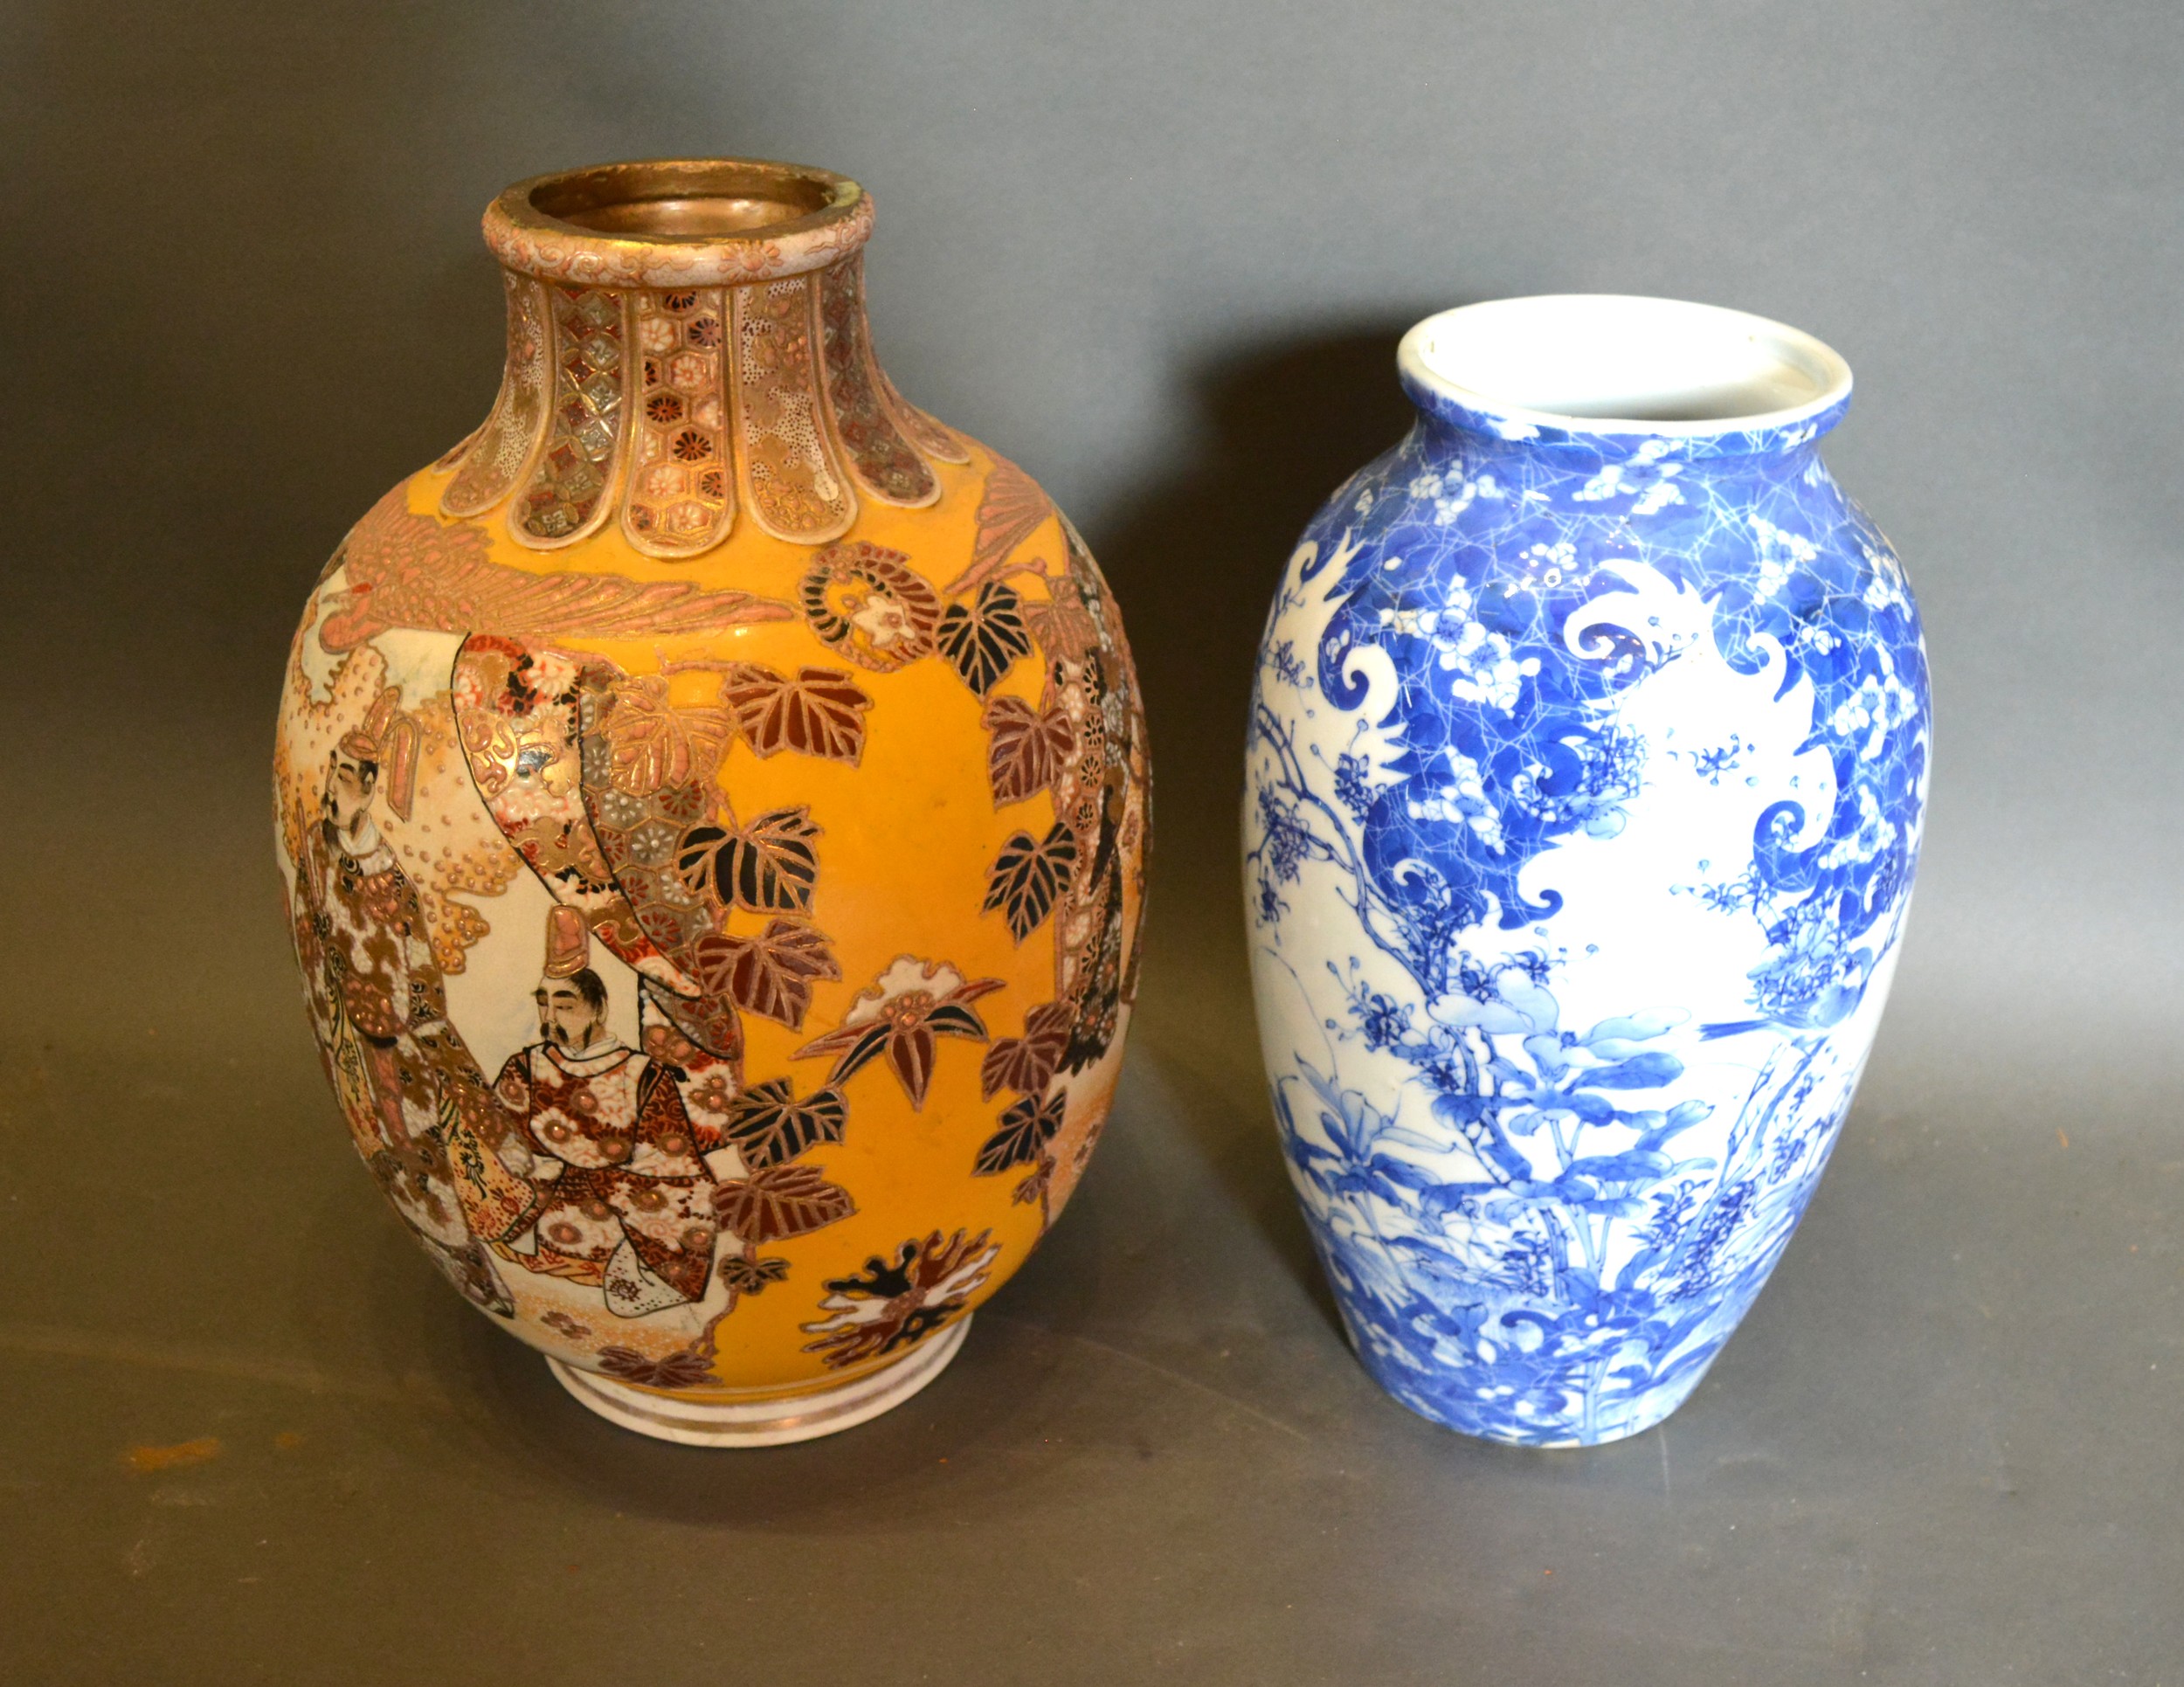 A Japanese Porcelain Underglaze Blue Decorated Vase 30cm tall together with a Satsuma vase 34cm tall